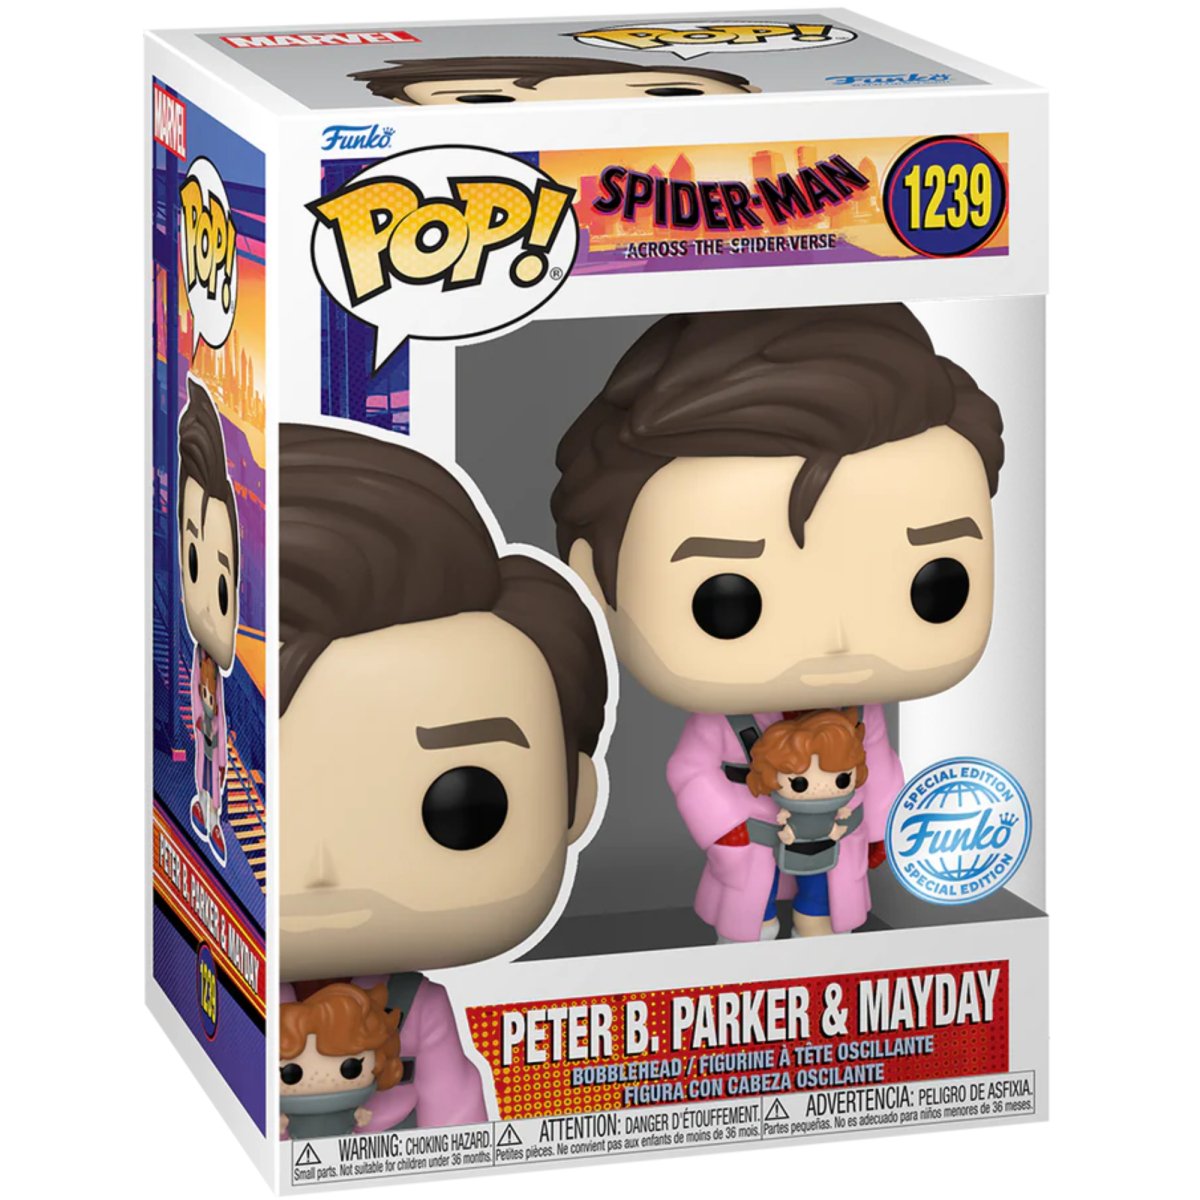 Spider-Man Across the Spider-Verse - Peter B. Parker & Mayday (Special Edition) #1239 - Funko Pop! Vinyl Marvel - Persona Toys